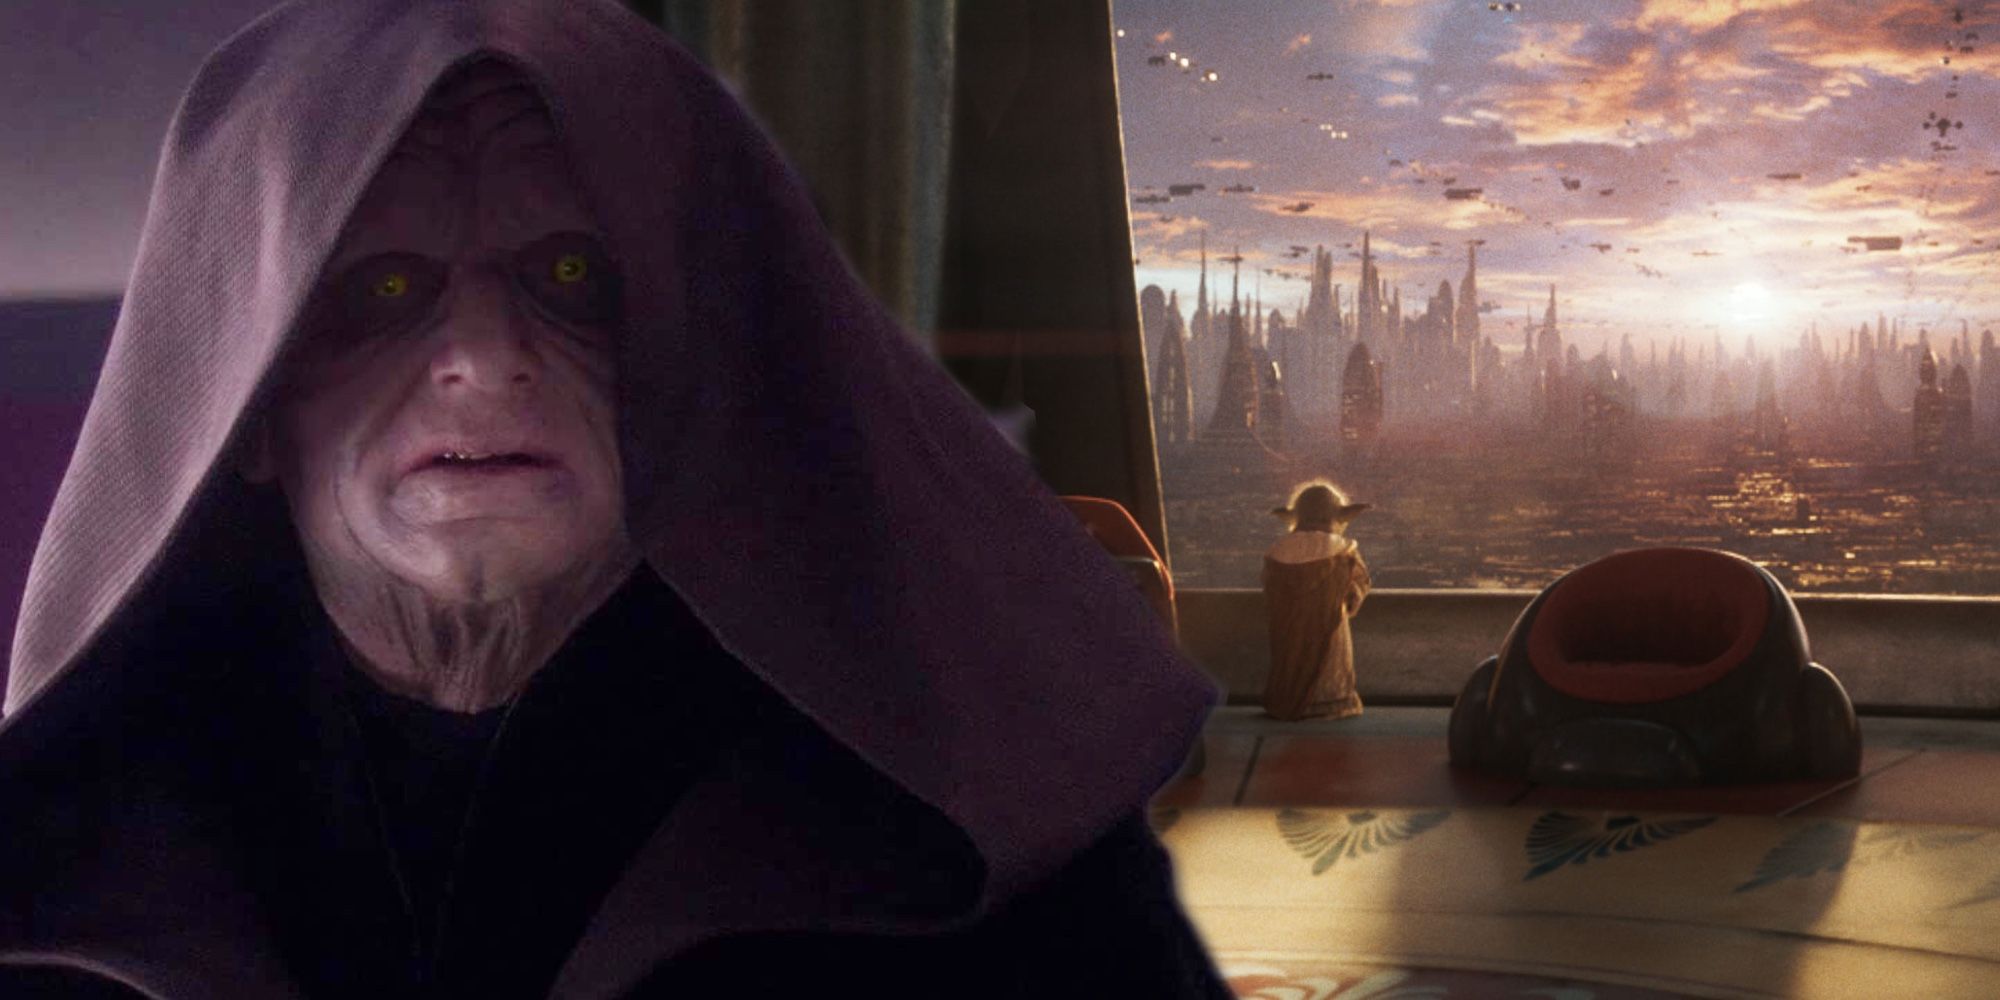 Star Wars Explains How The Jedi's Downfall Started Before The Prequels